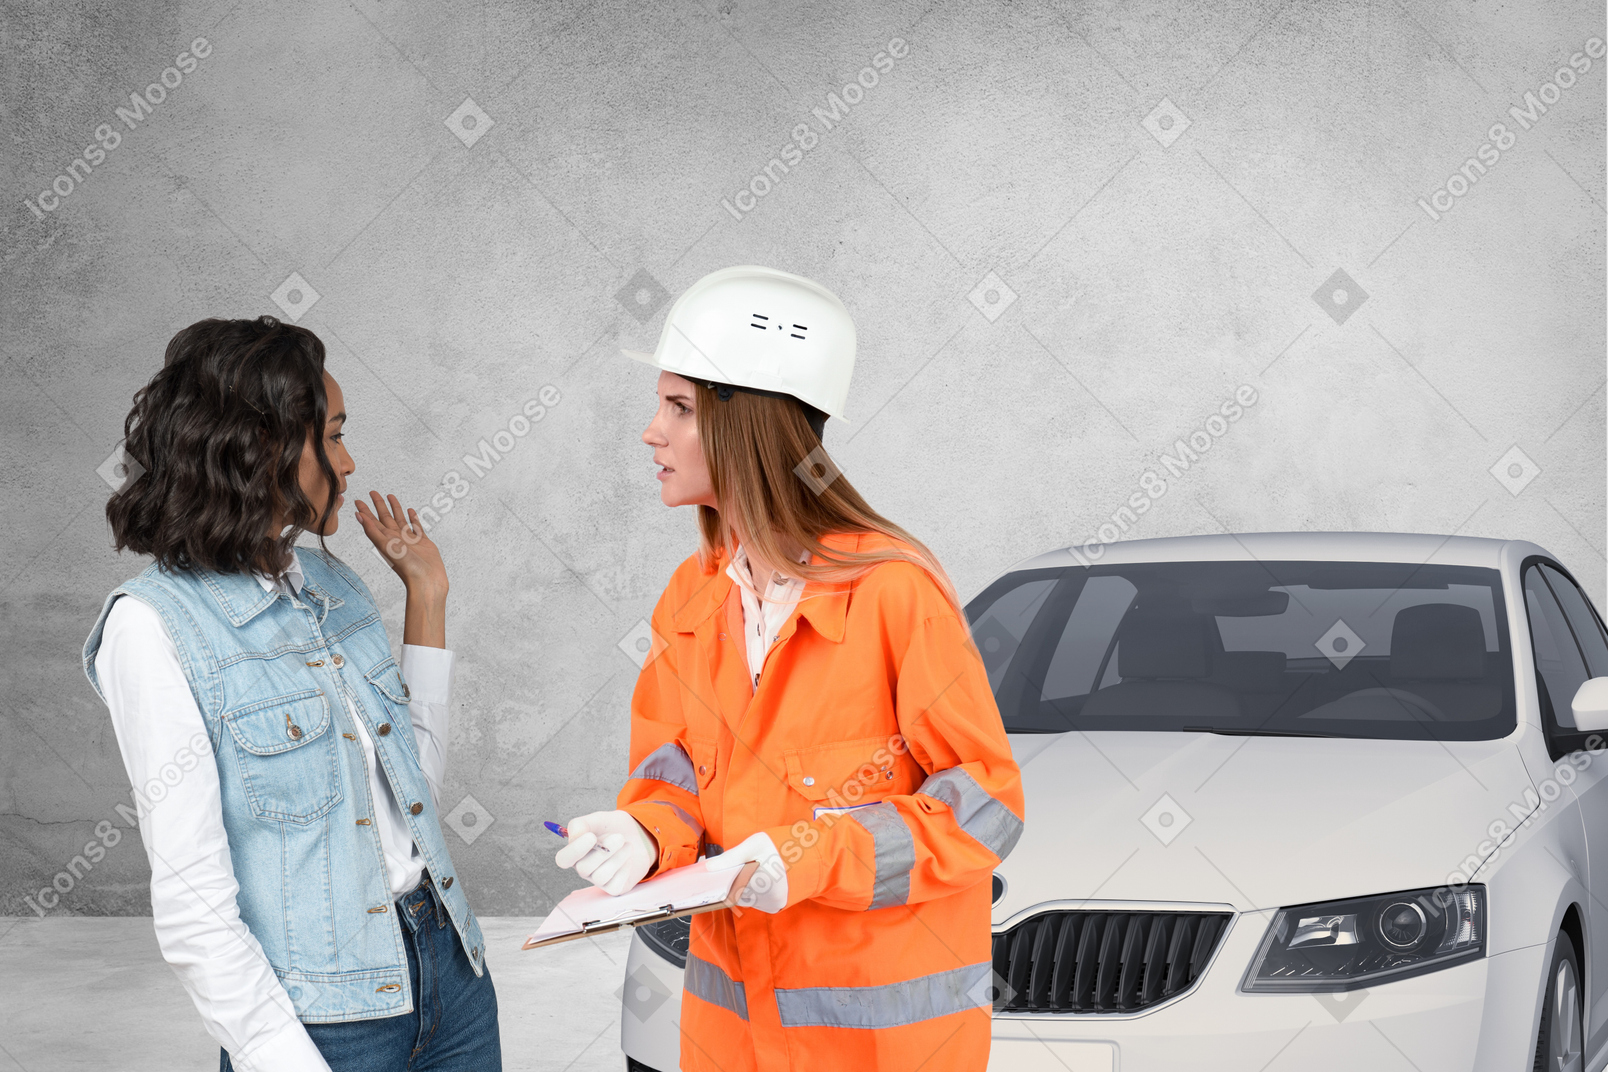 Two young women at an underground parking lot